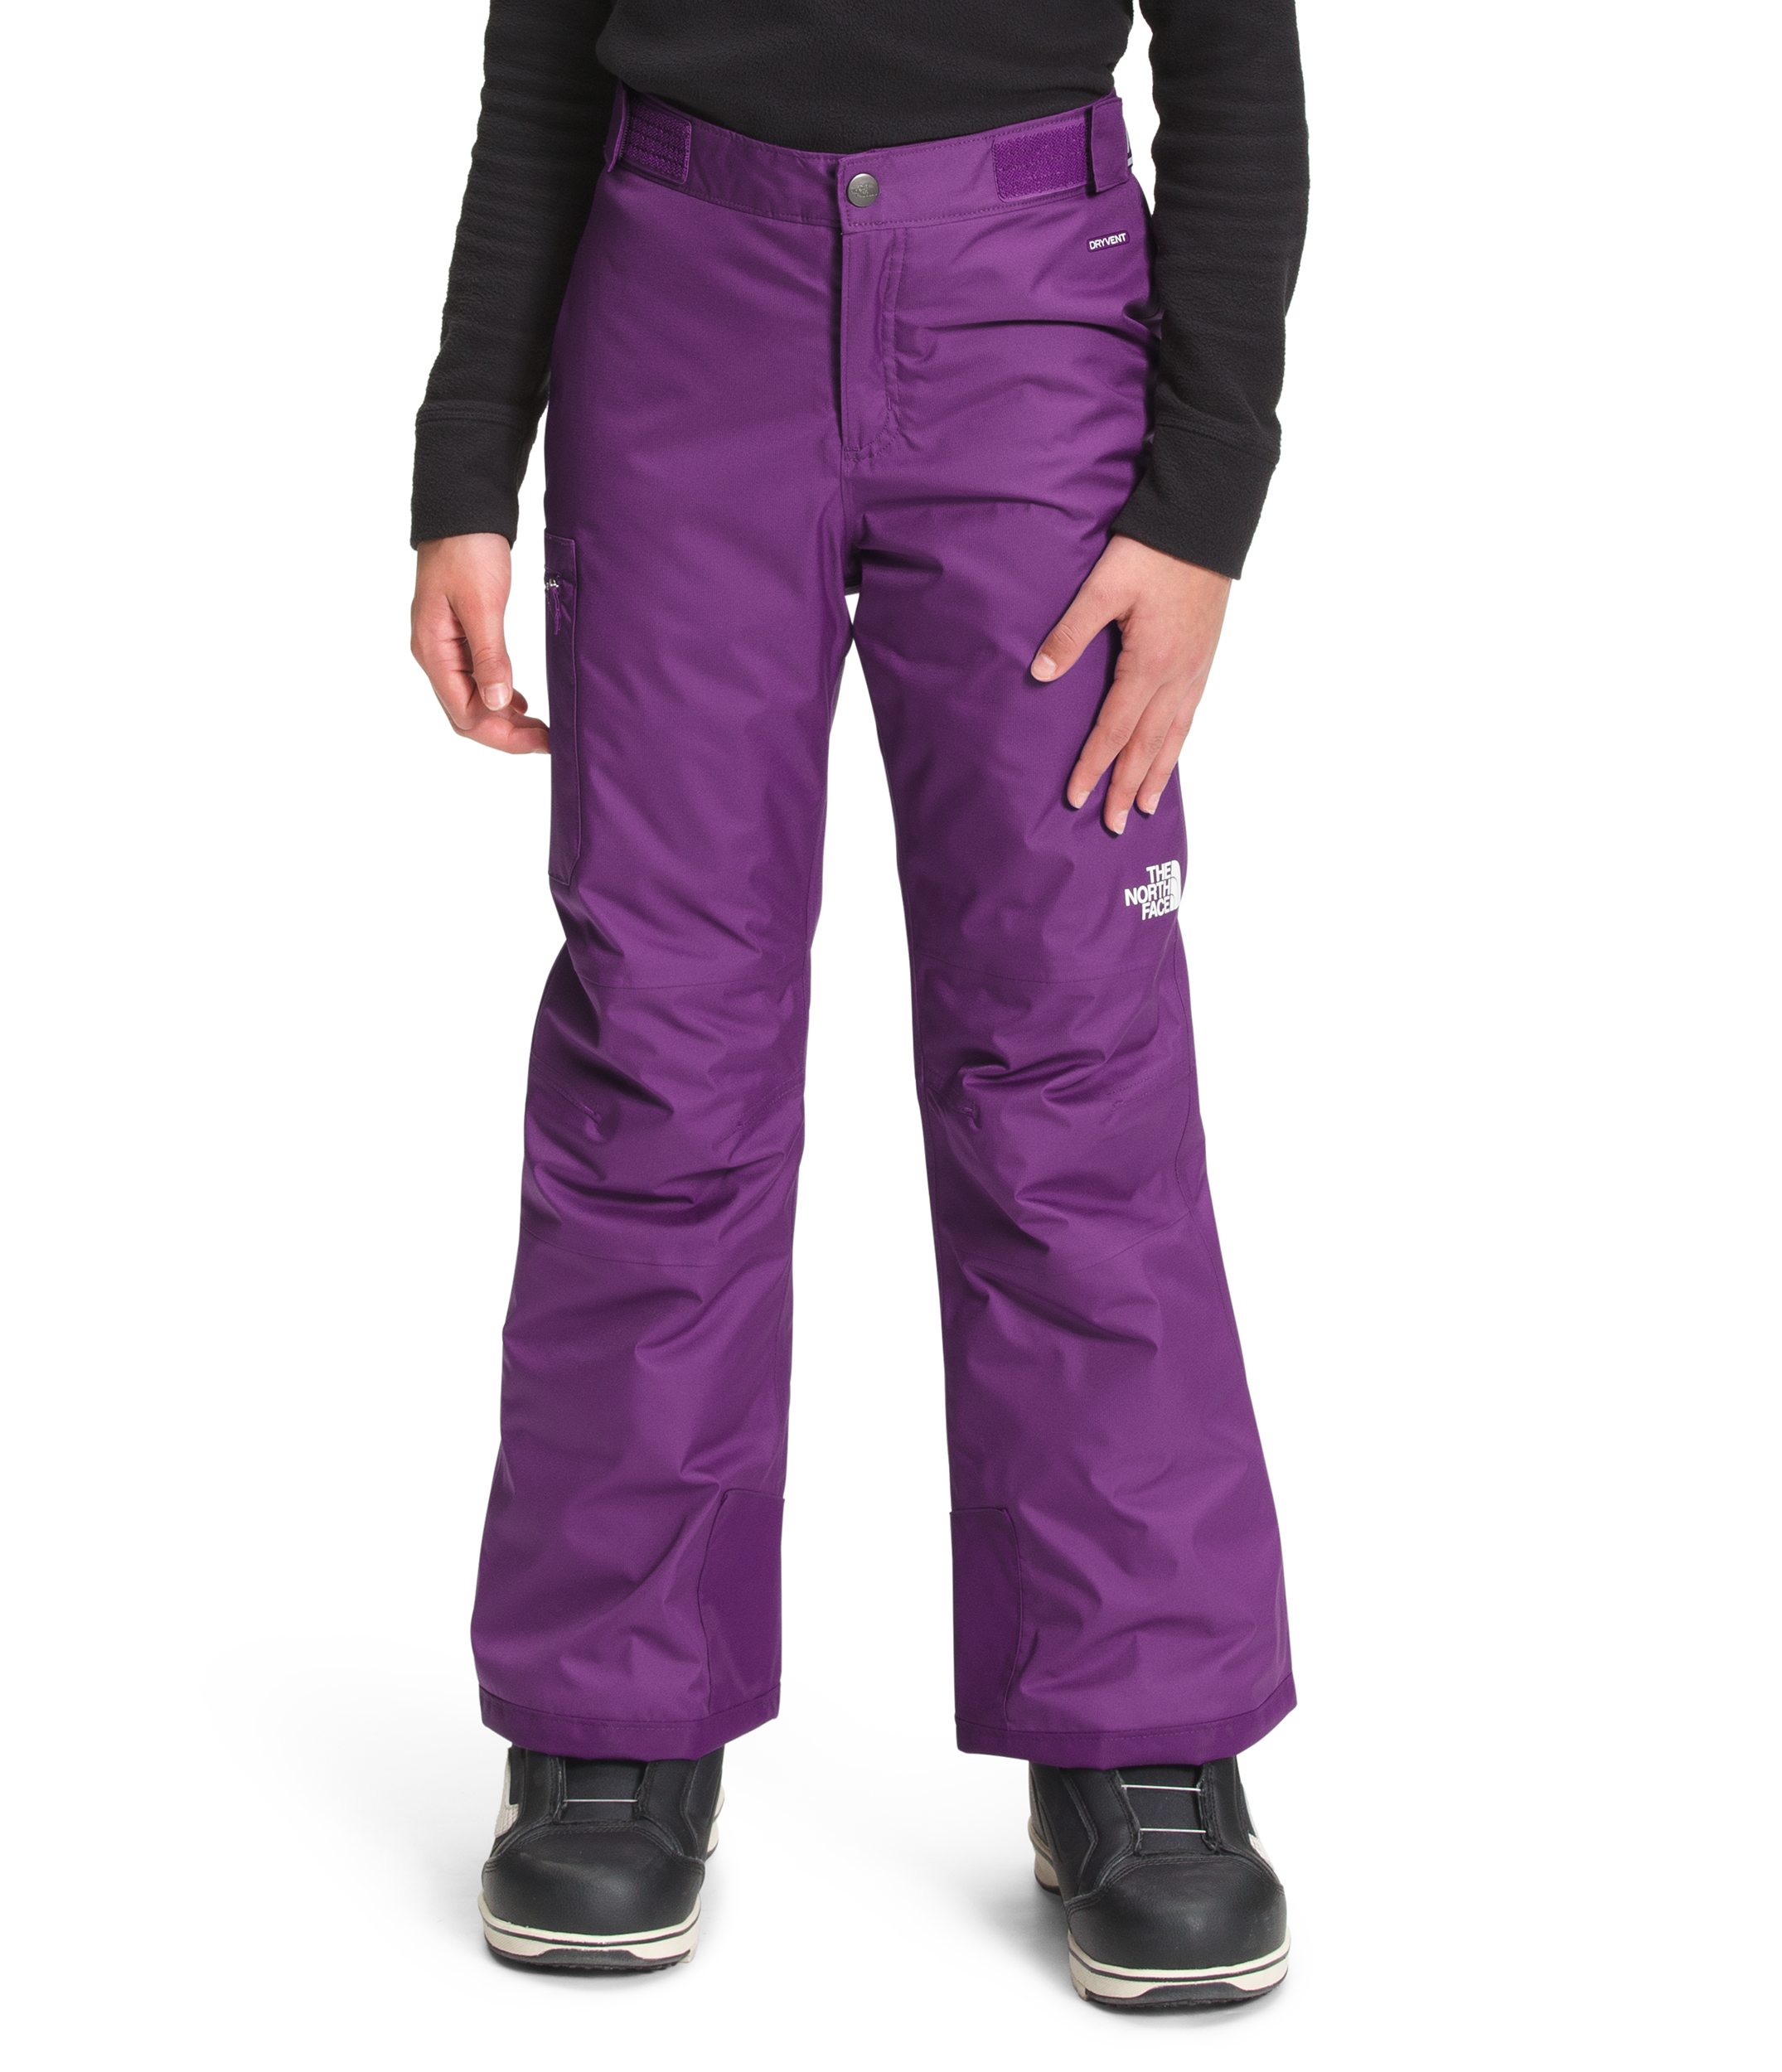 The North Face Hyvent pants